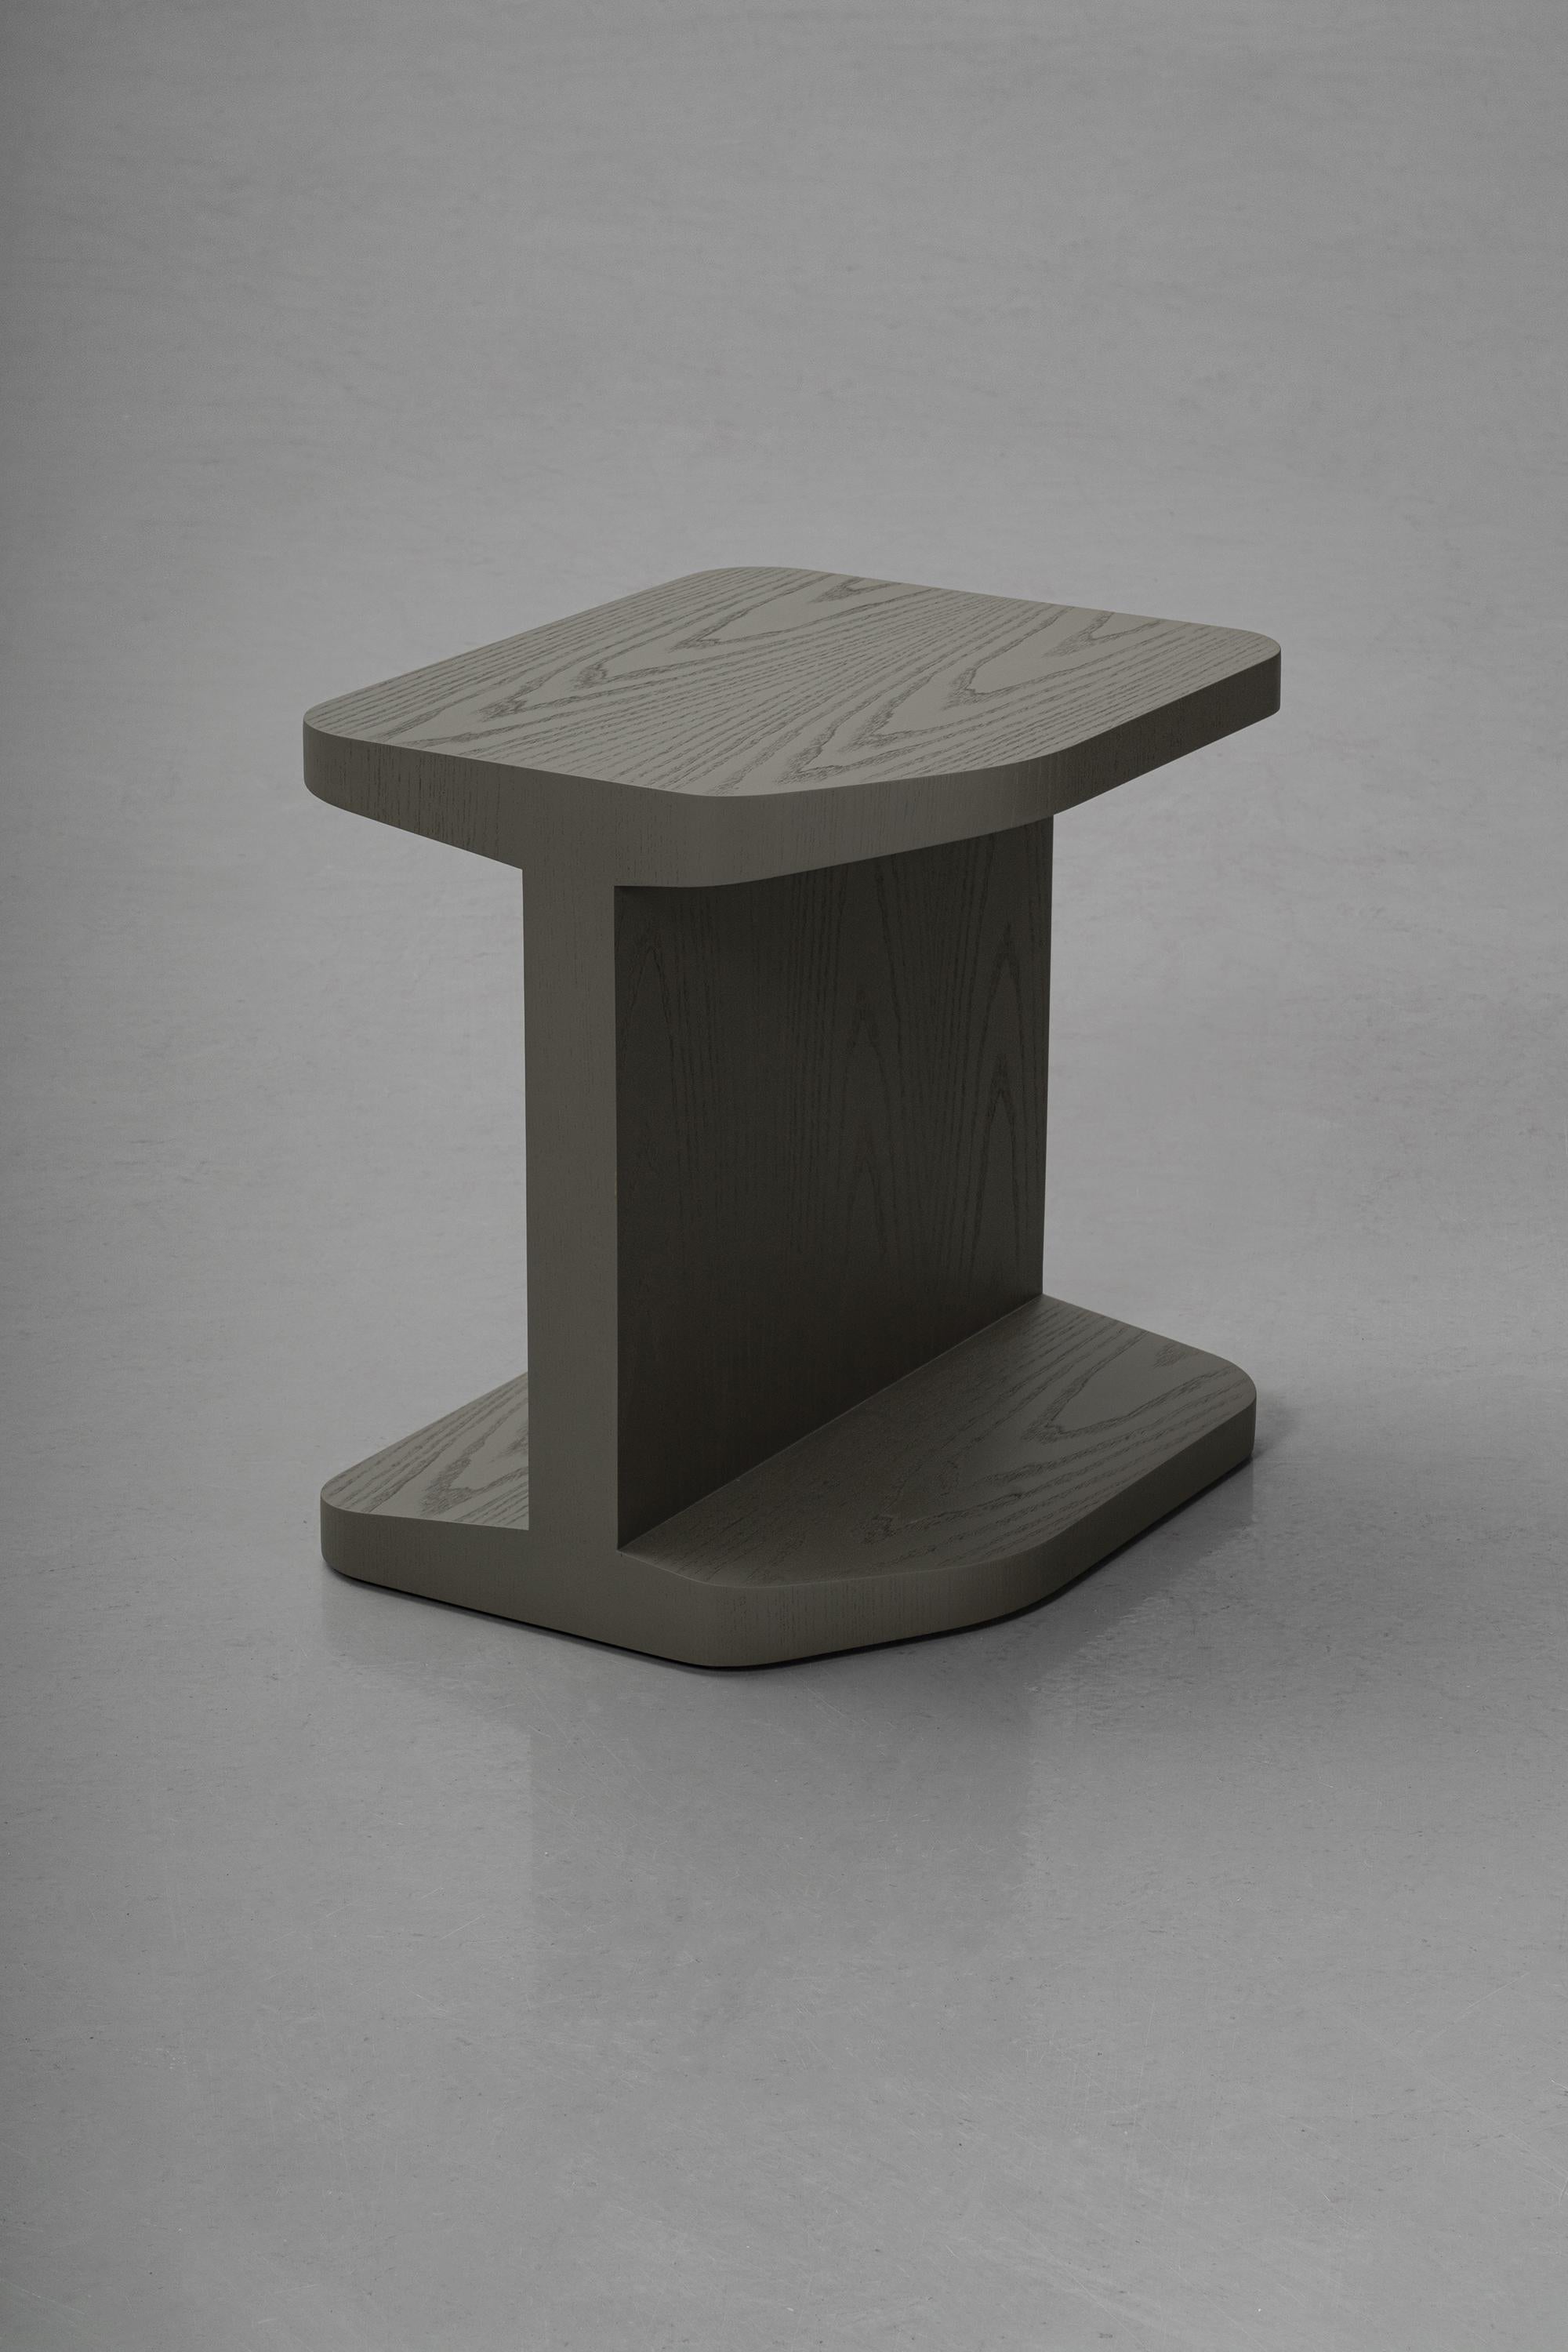 Weight of Shadow Side Table by Atelier V&F
Dimensions: D 39 x W 47.5 x H 49 cm. 
Materials: Ash.

Available in black or grey. Please contact us.

The weightiness and the fine curves of the blocks which are characteristic of this collection show our